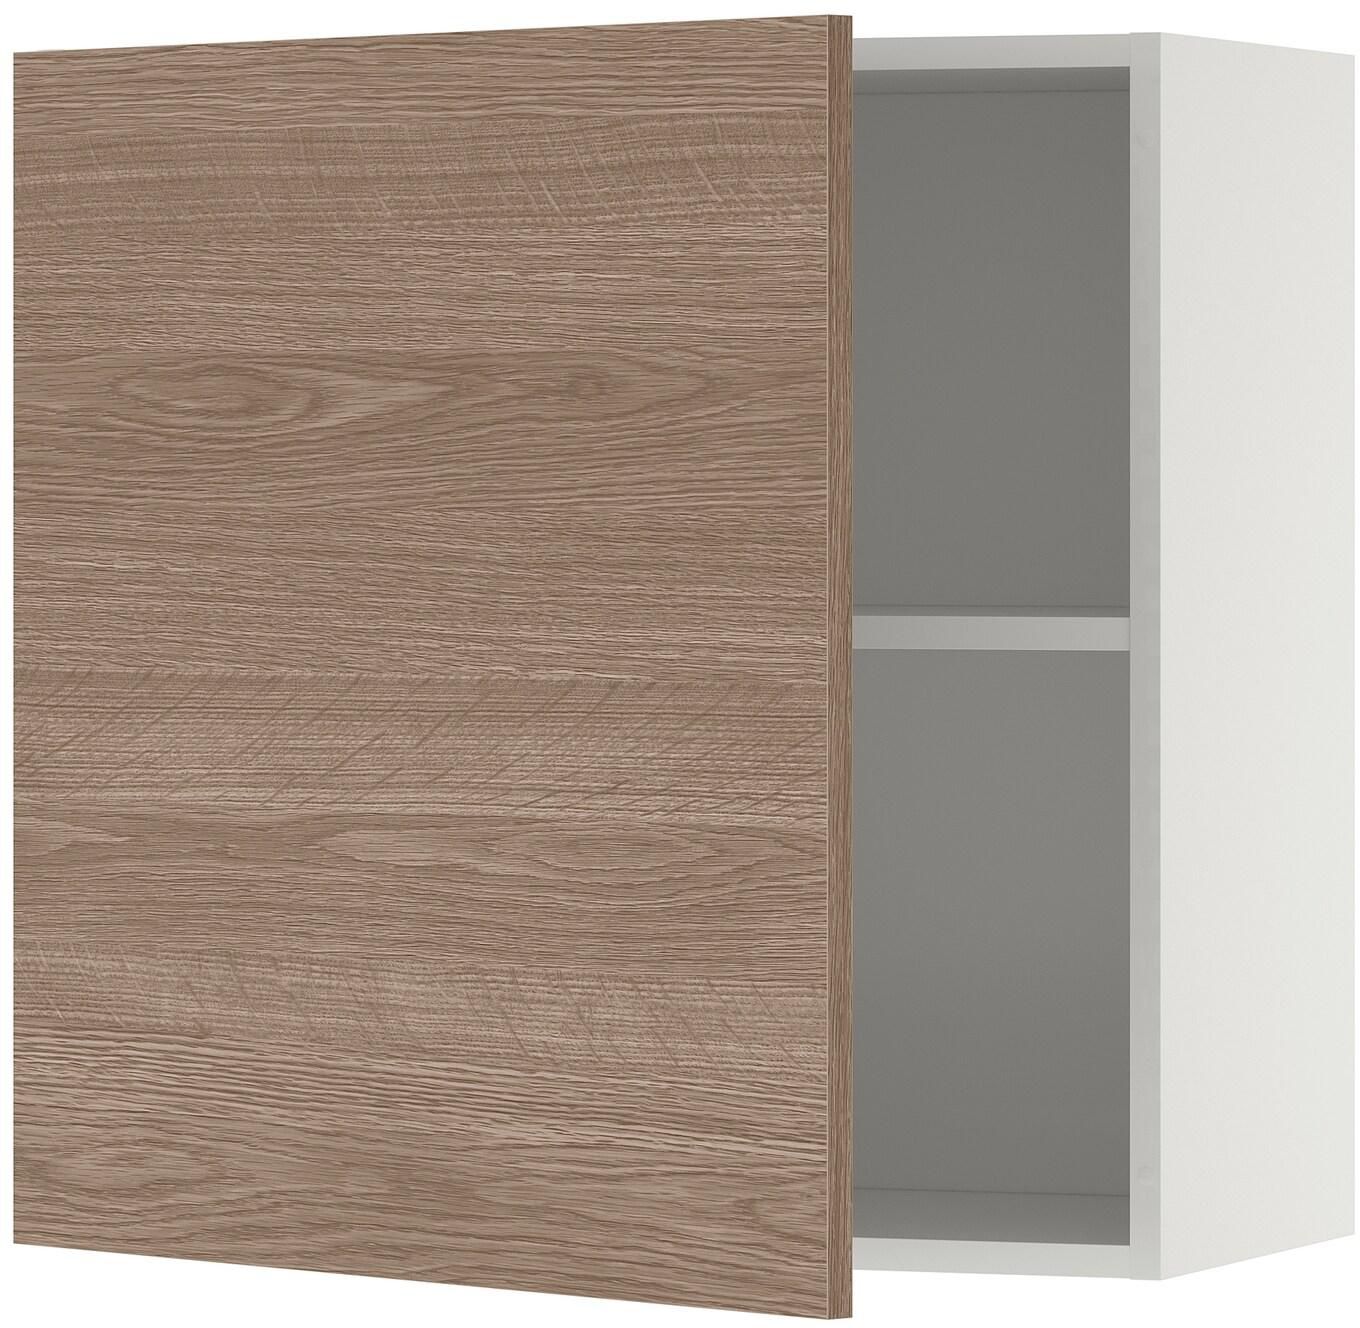 KNOXHULT Wall cabinet with door - wood effect/grey 60x60 cm